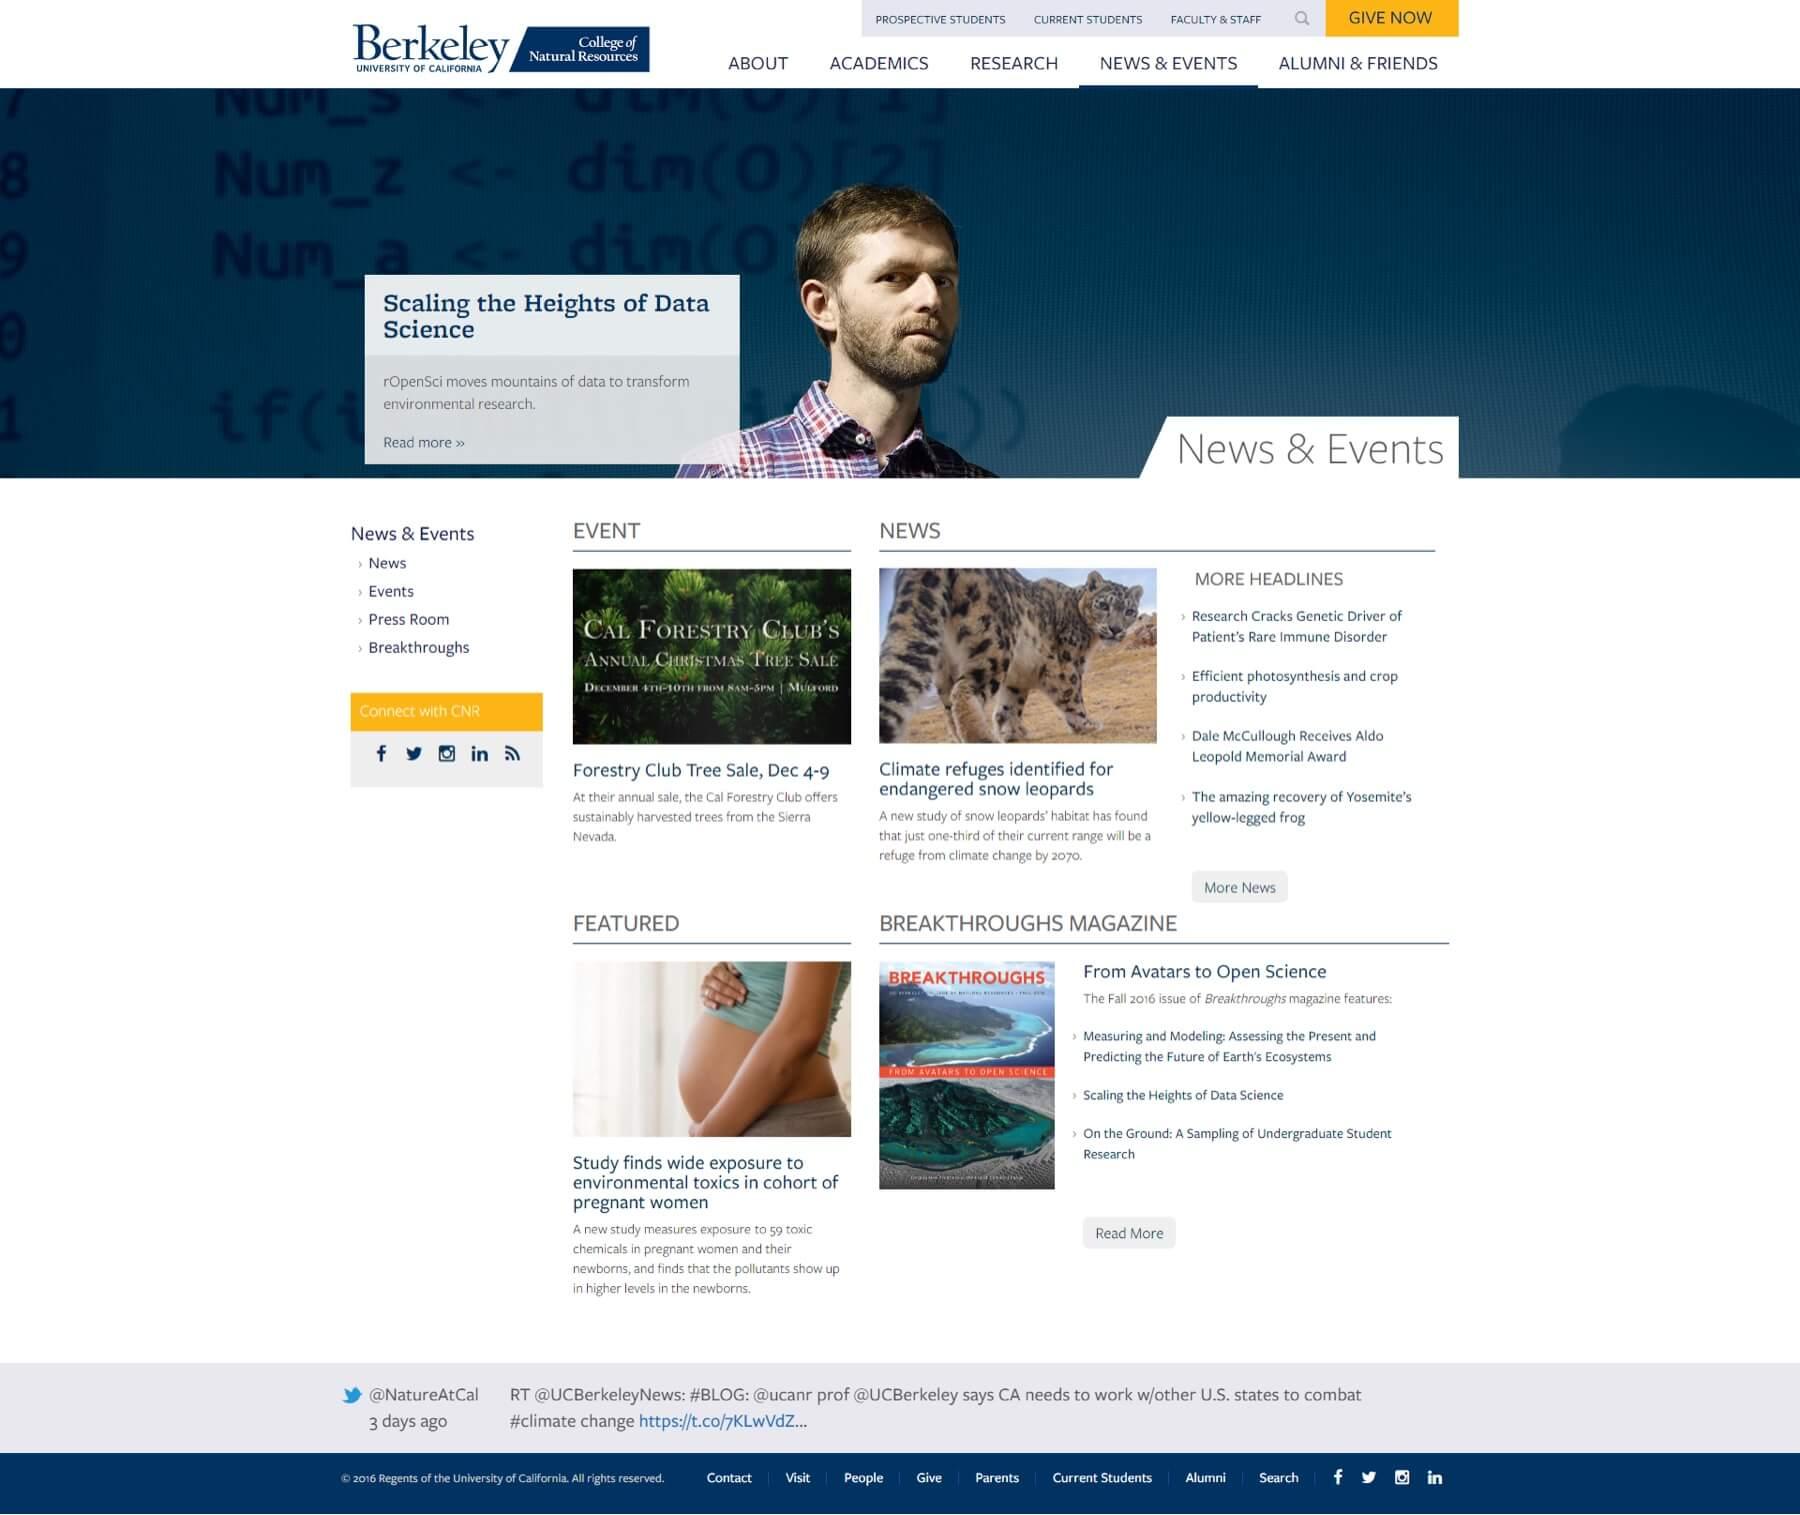 A screenshot of the College of Natural Resources' news landing page